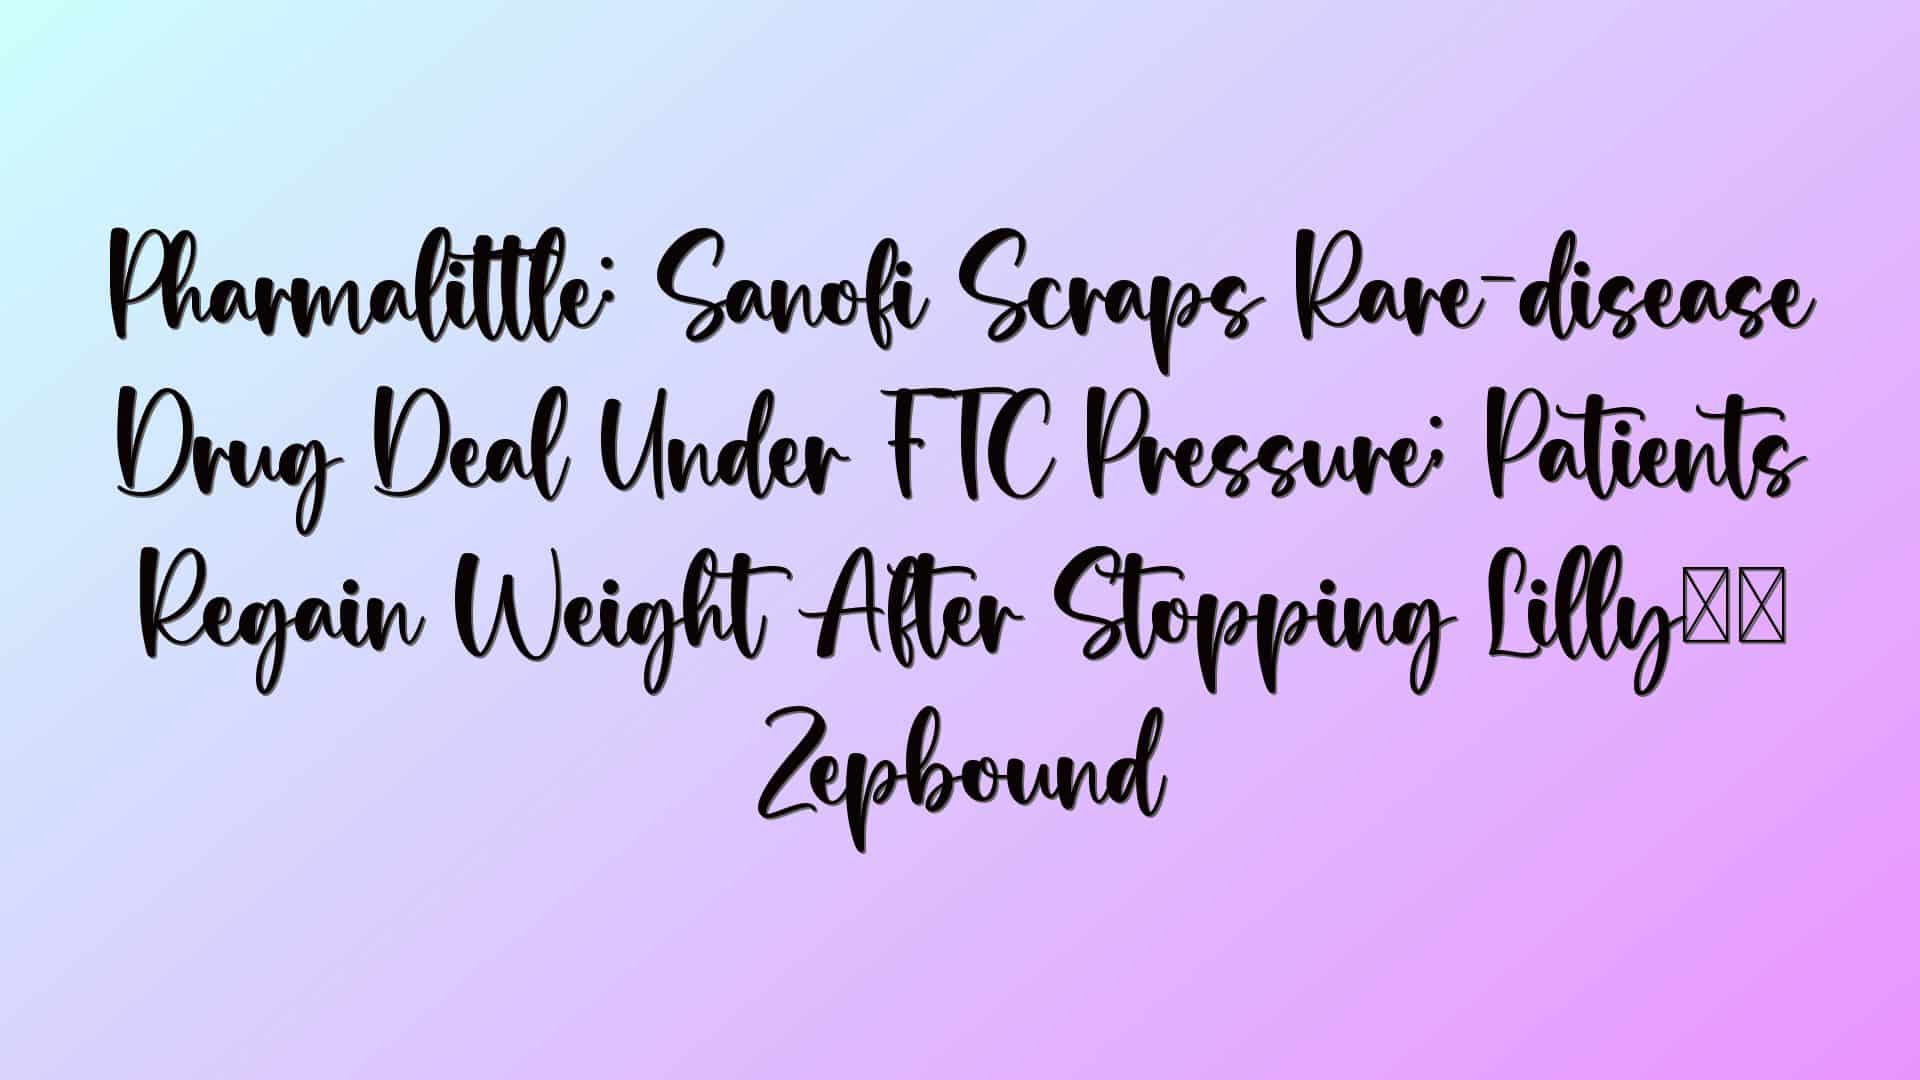 Pharmalittle: Sanofi Scraps Rare-disease Drug Deal Under FTC Pressure; Patients Regain Weight After Stopping Lilly’s Zepbound